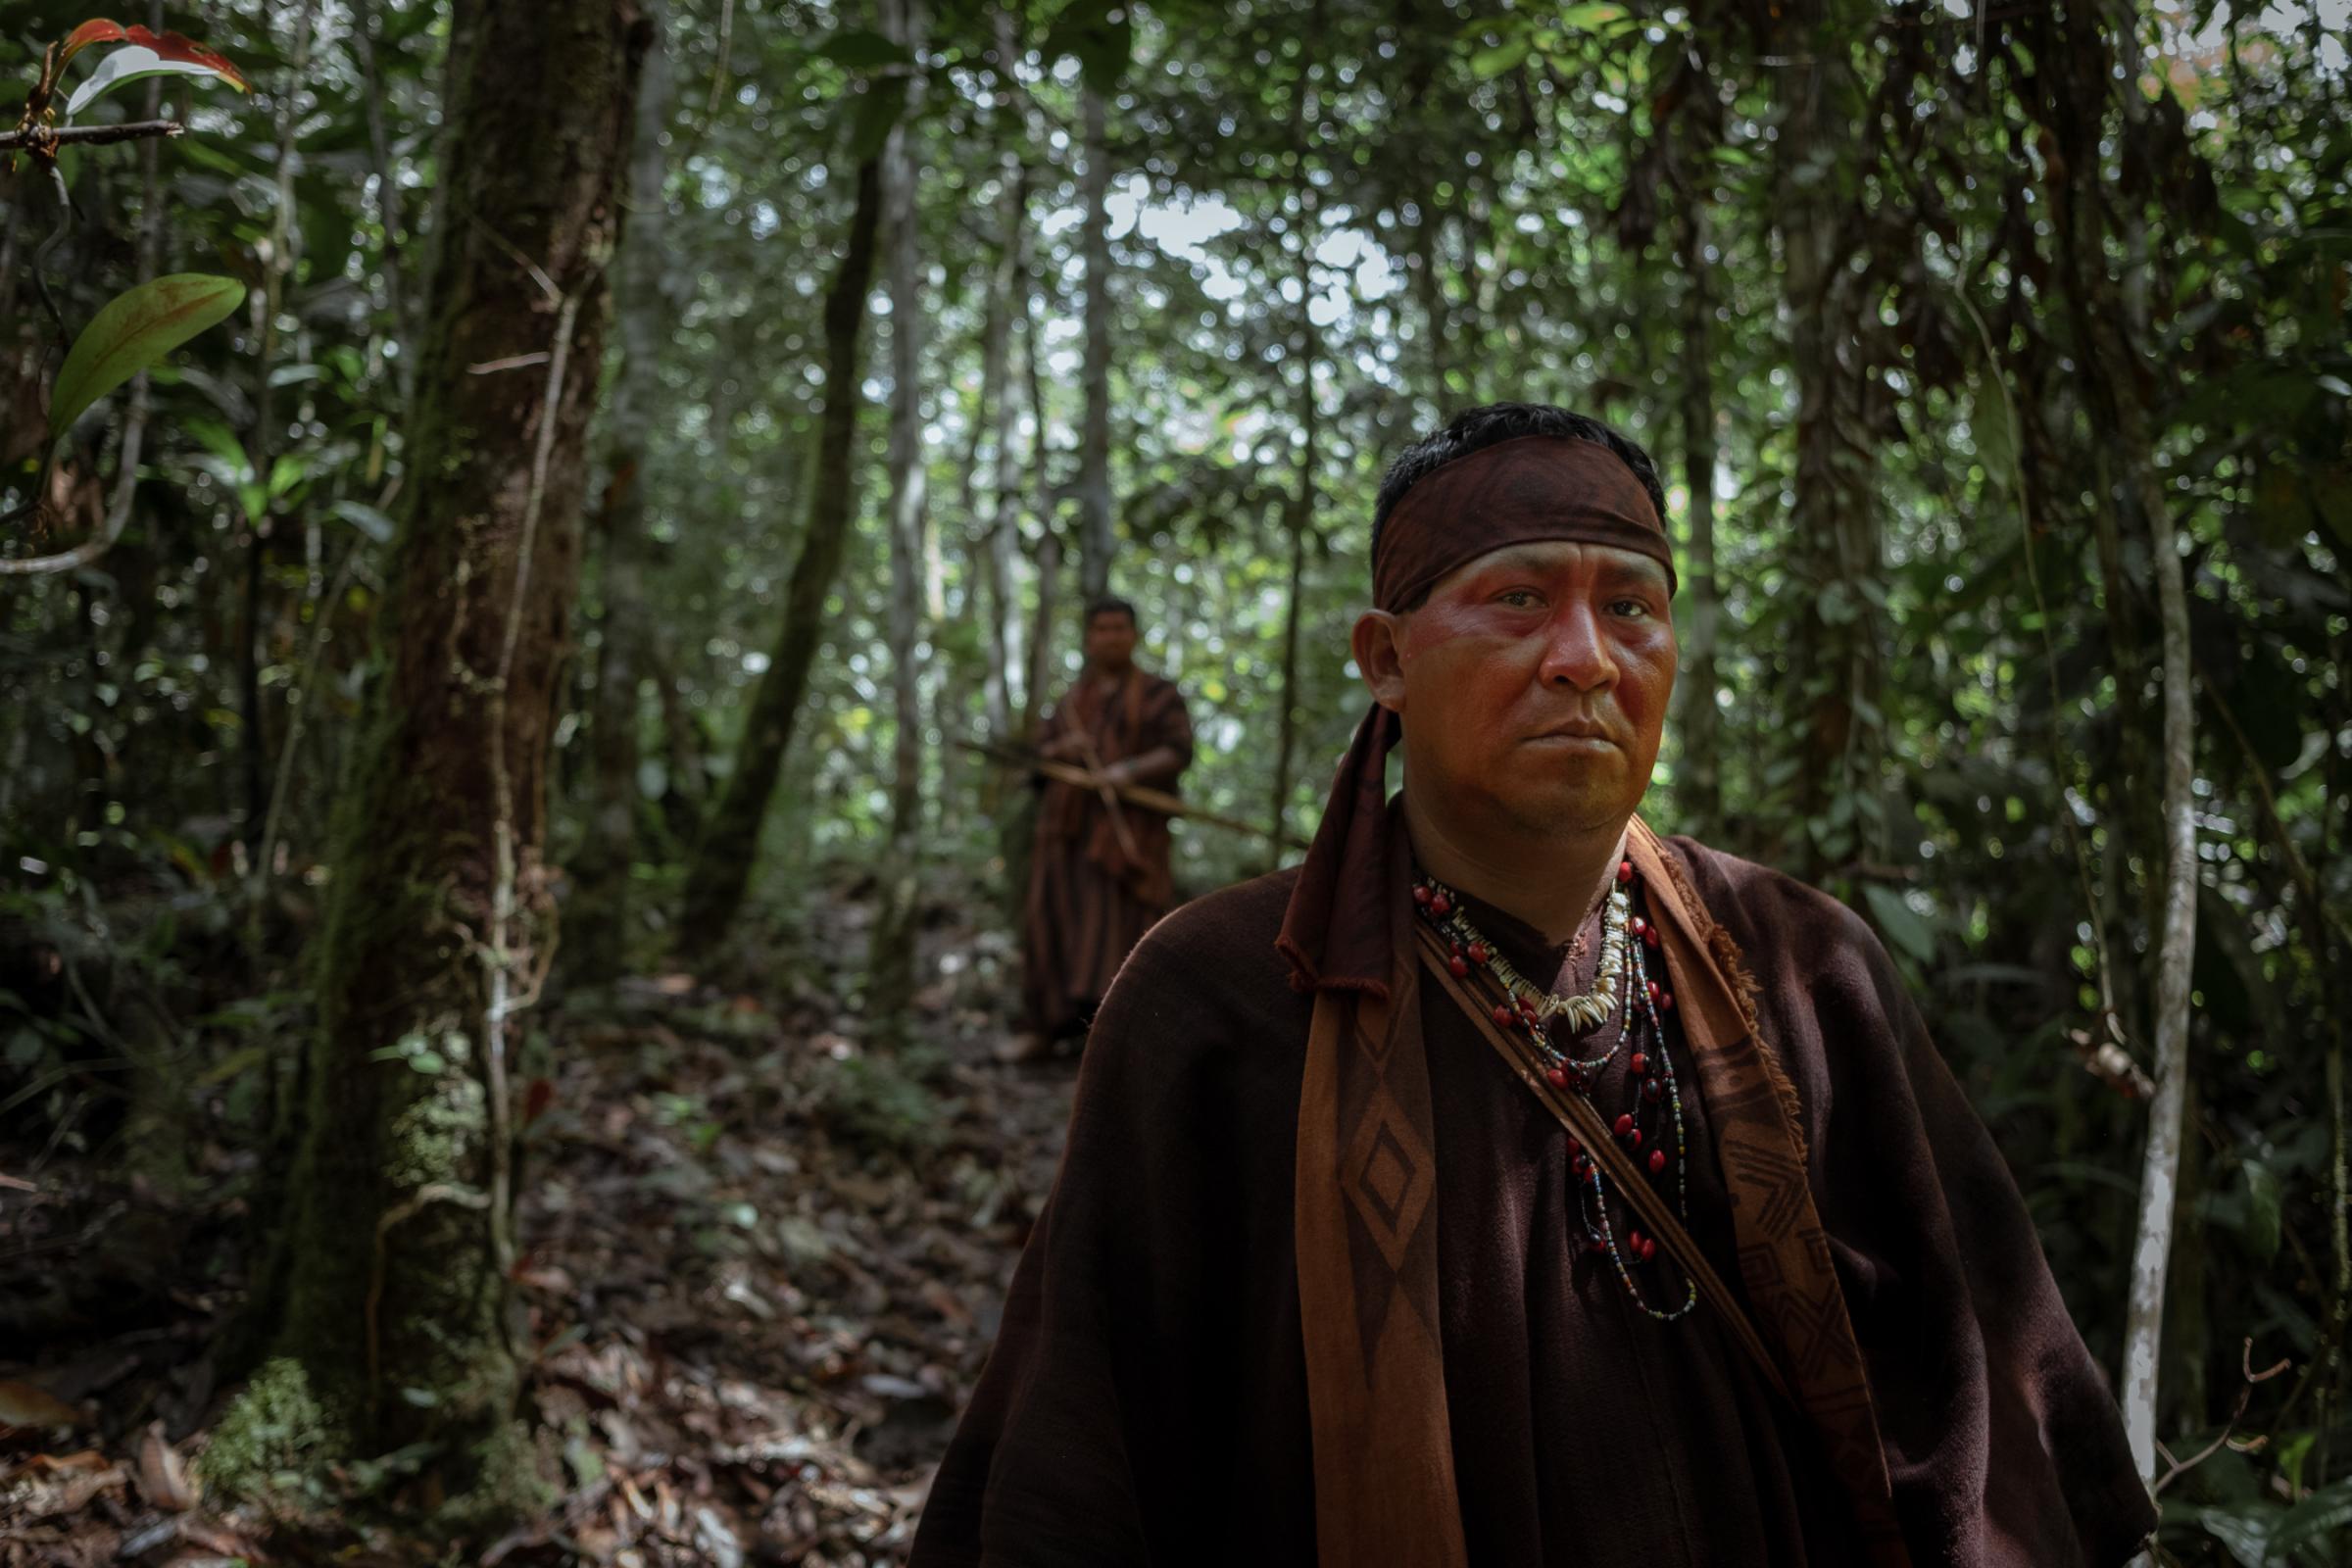 Kakataibo, voices from the forest - Berlin Diquez Rios, Ashaninka leader and director of the...